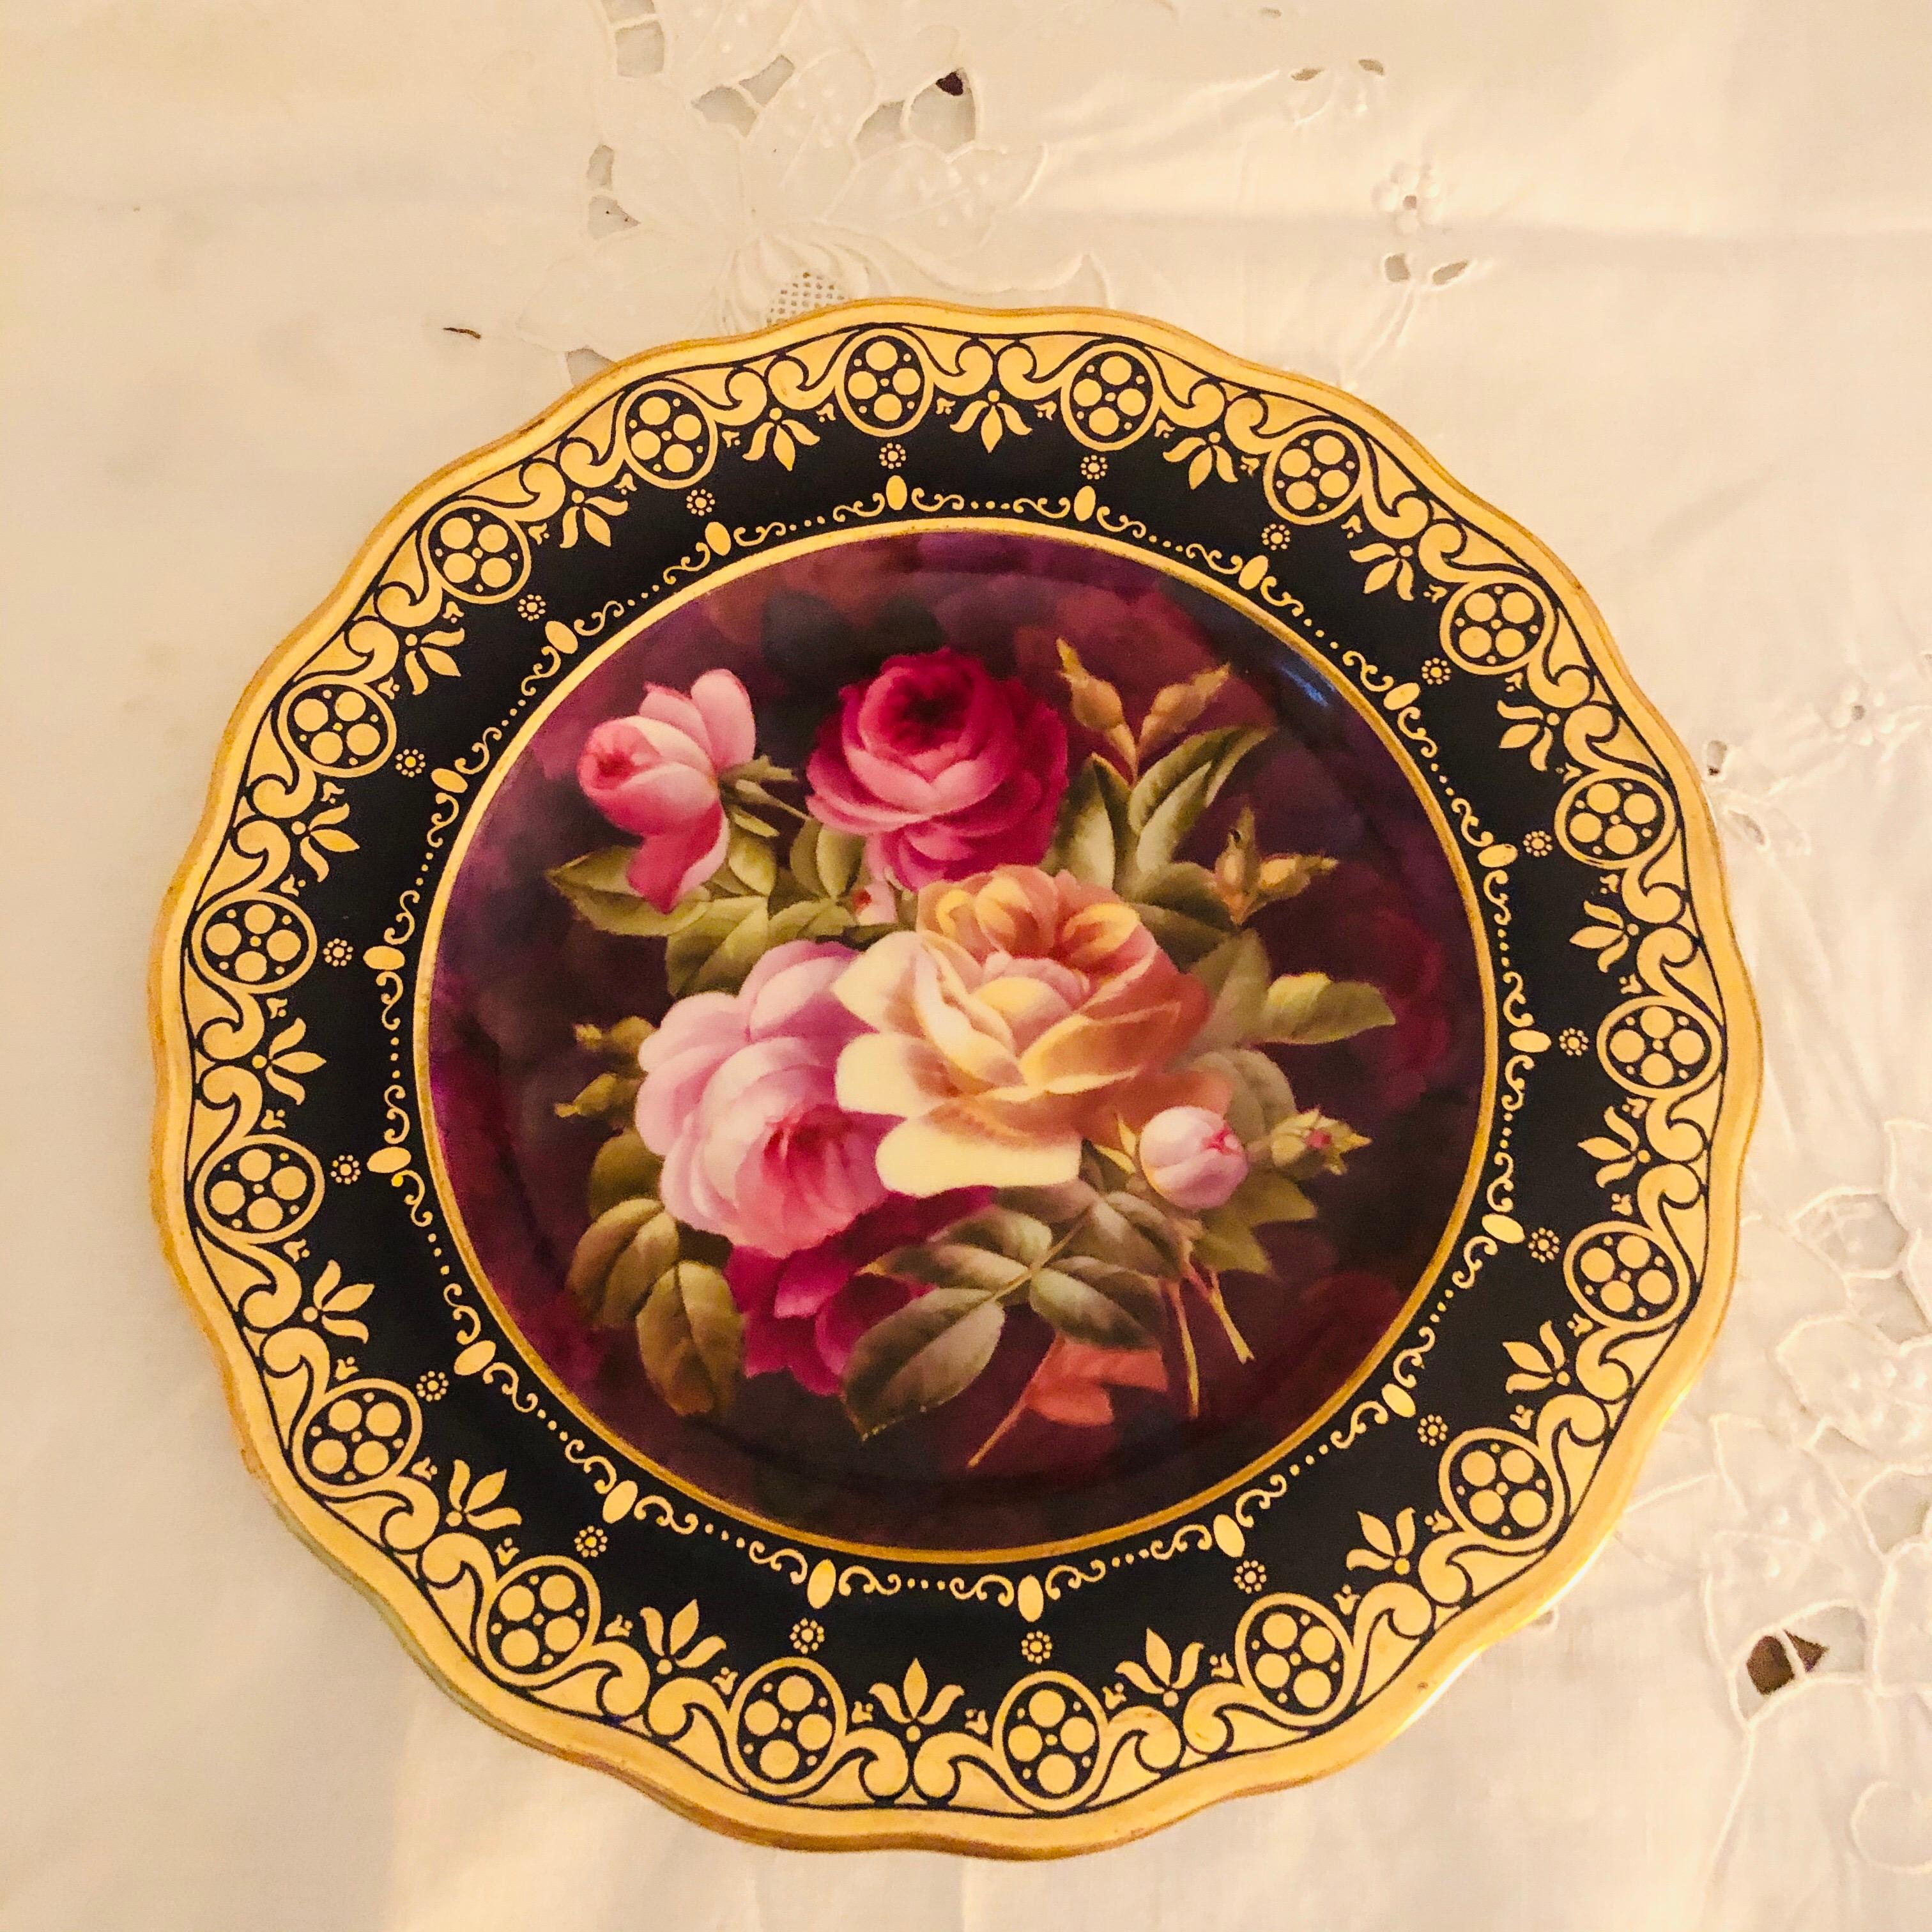 Rococo Twelve Exceptional Cobalt Cauldon Plates Each Painted with Different Roses For Sale